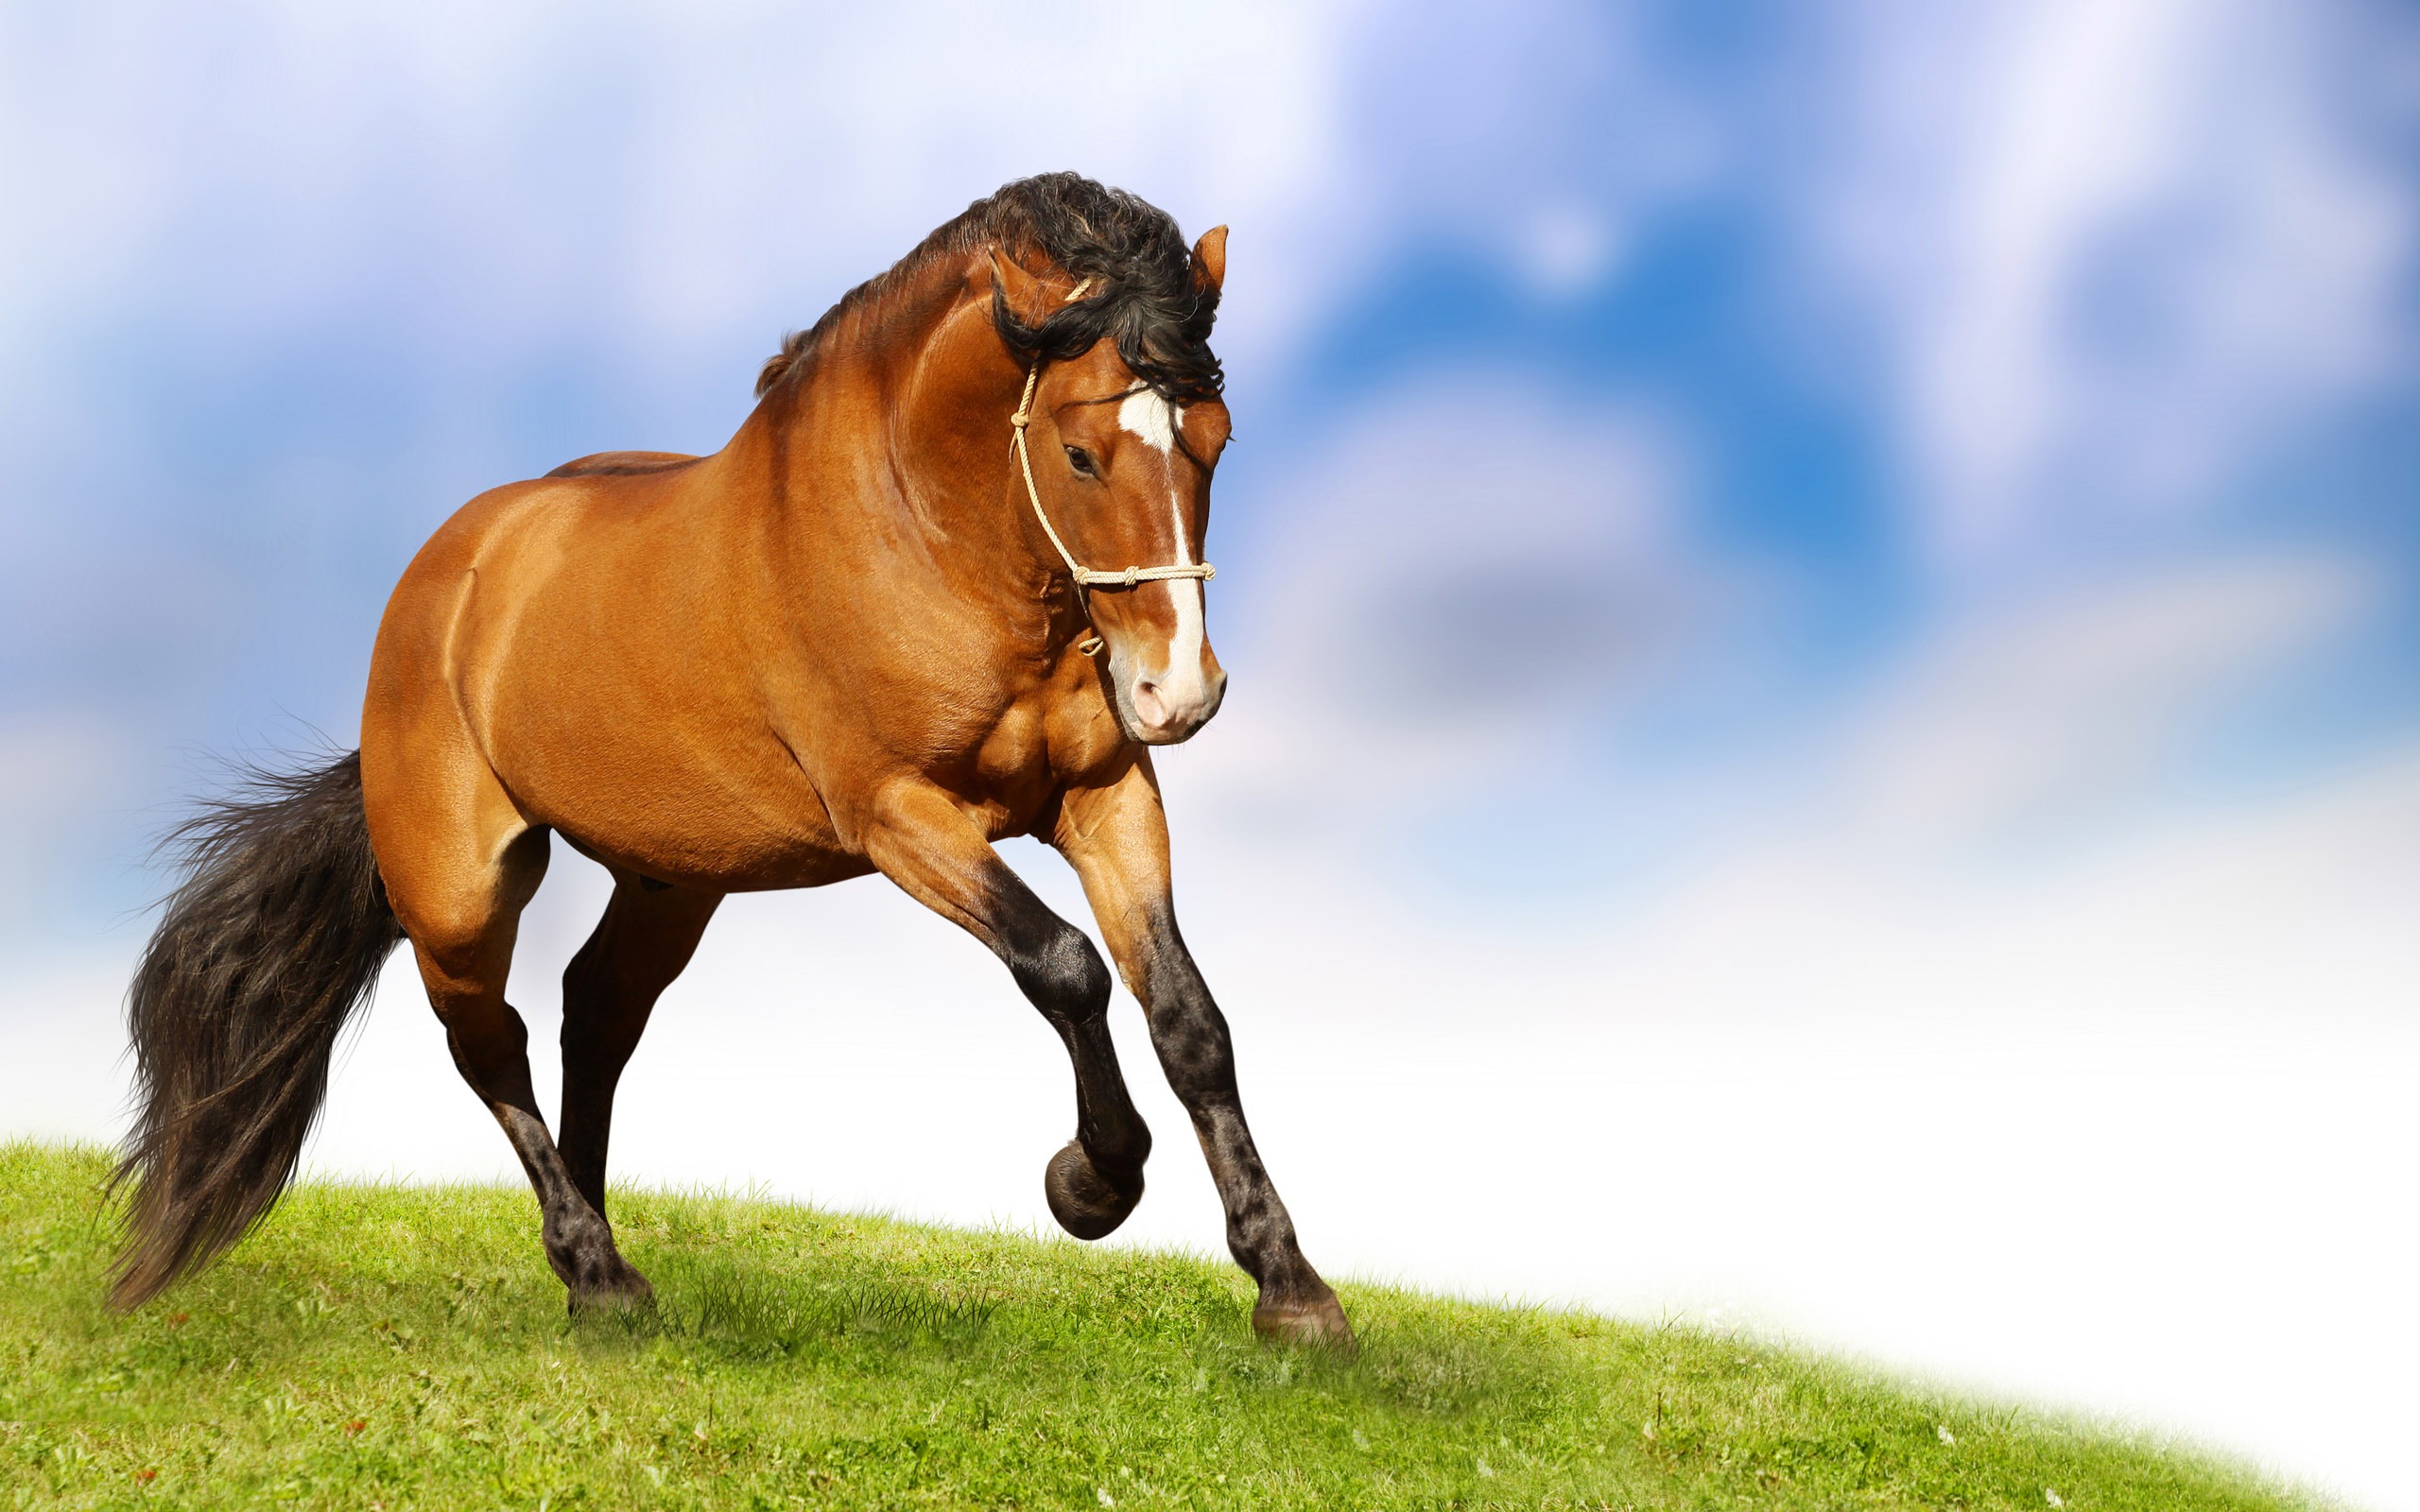 Horse HD Wallpaper Background Image 2560x1600 ID103285